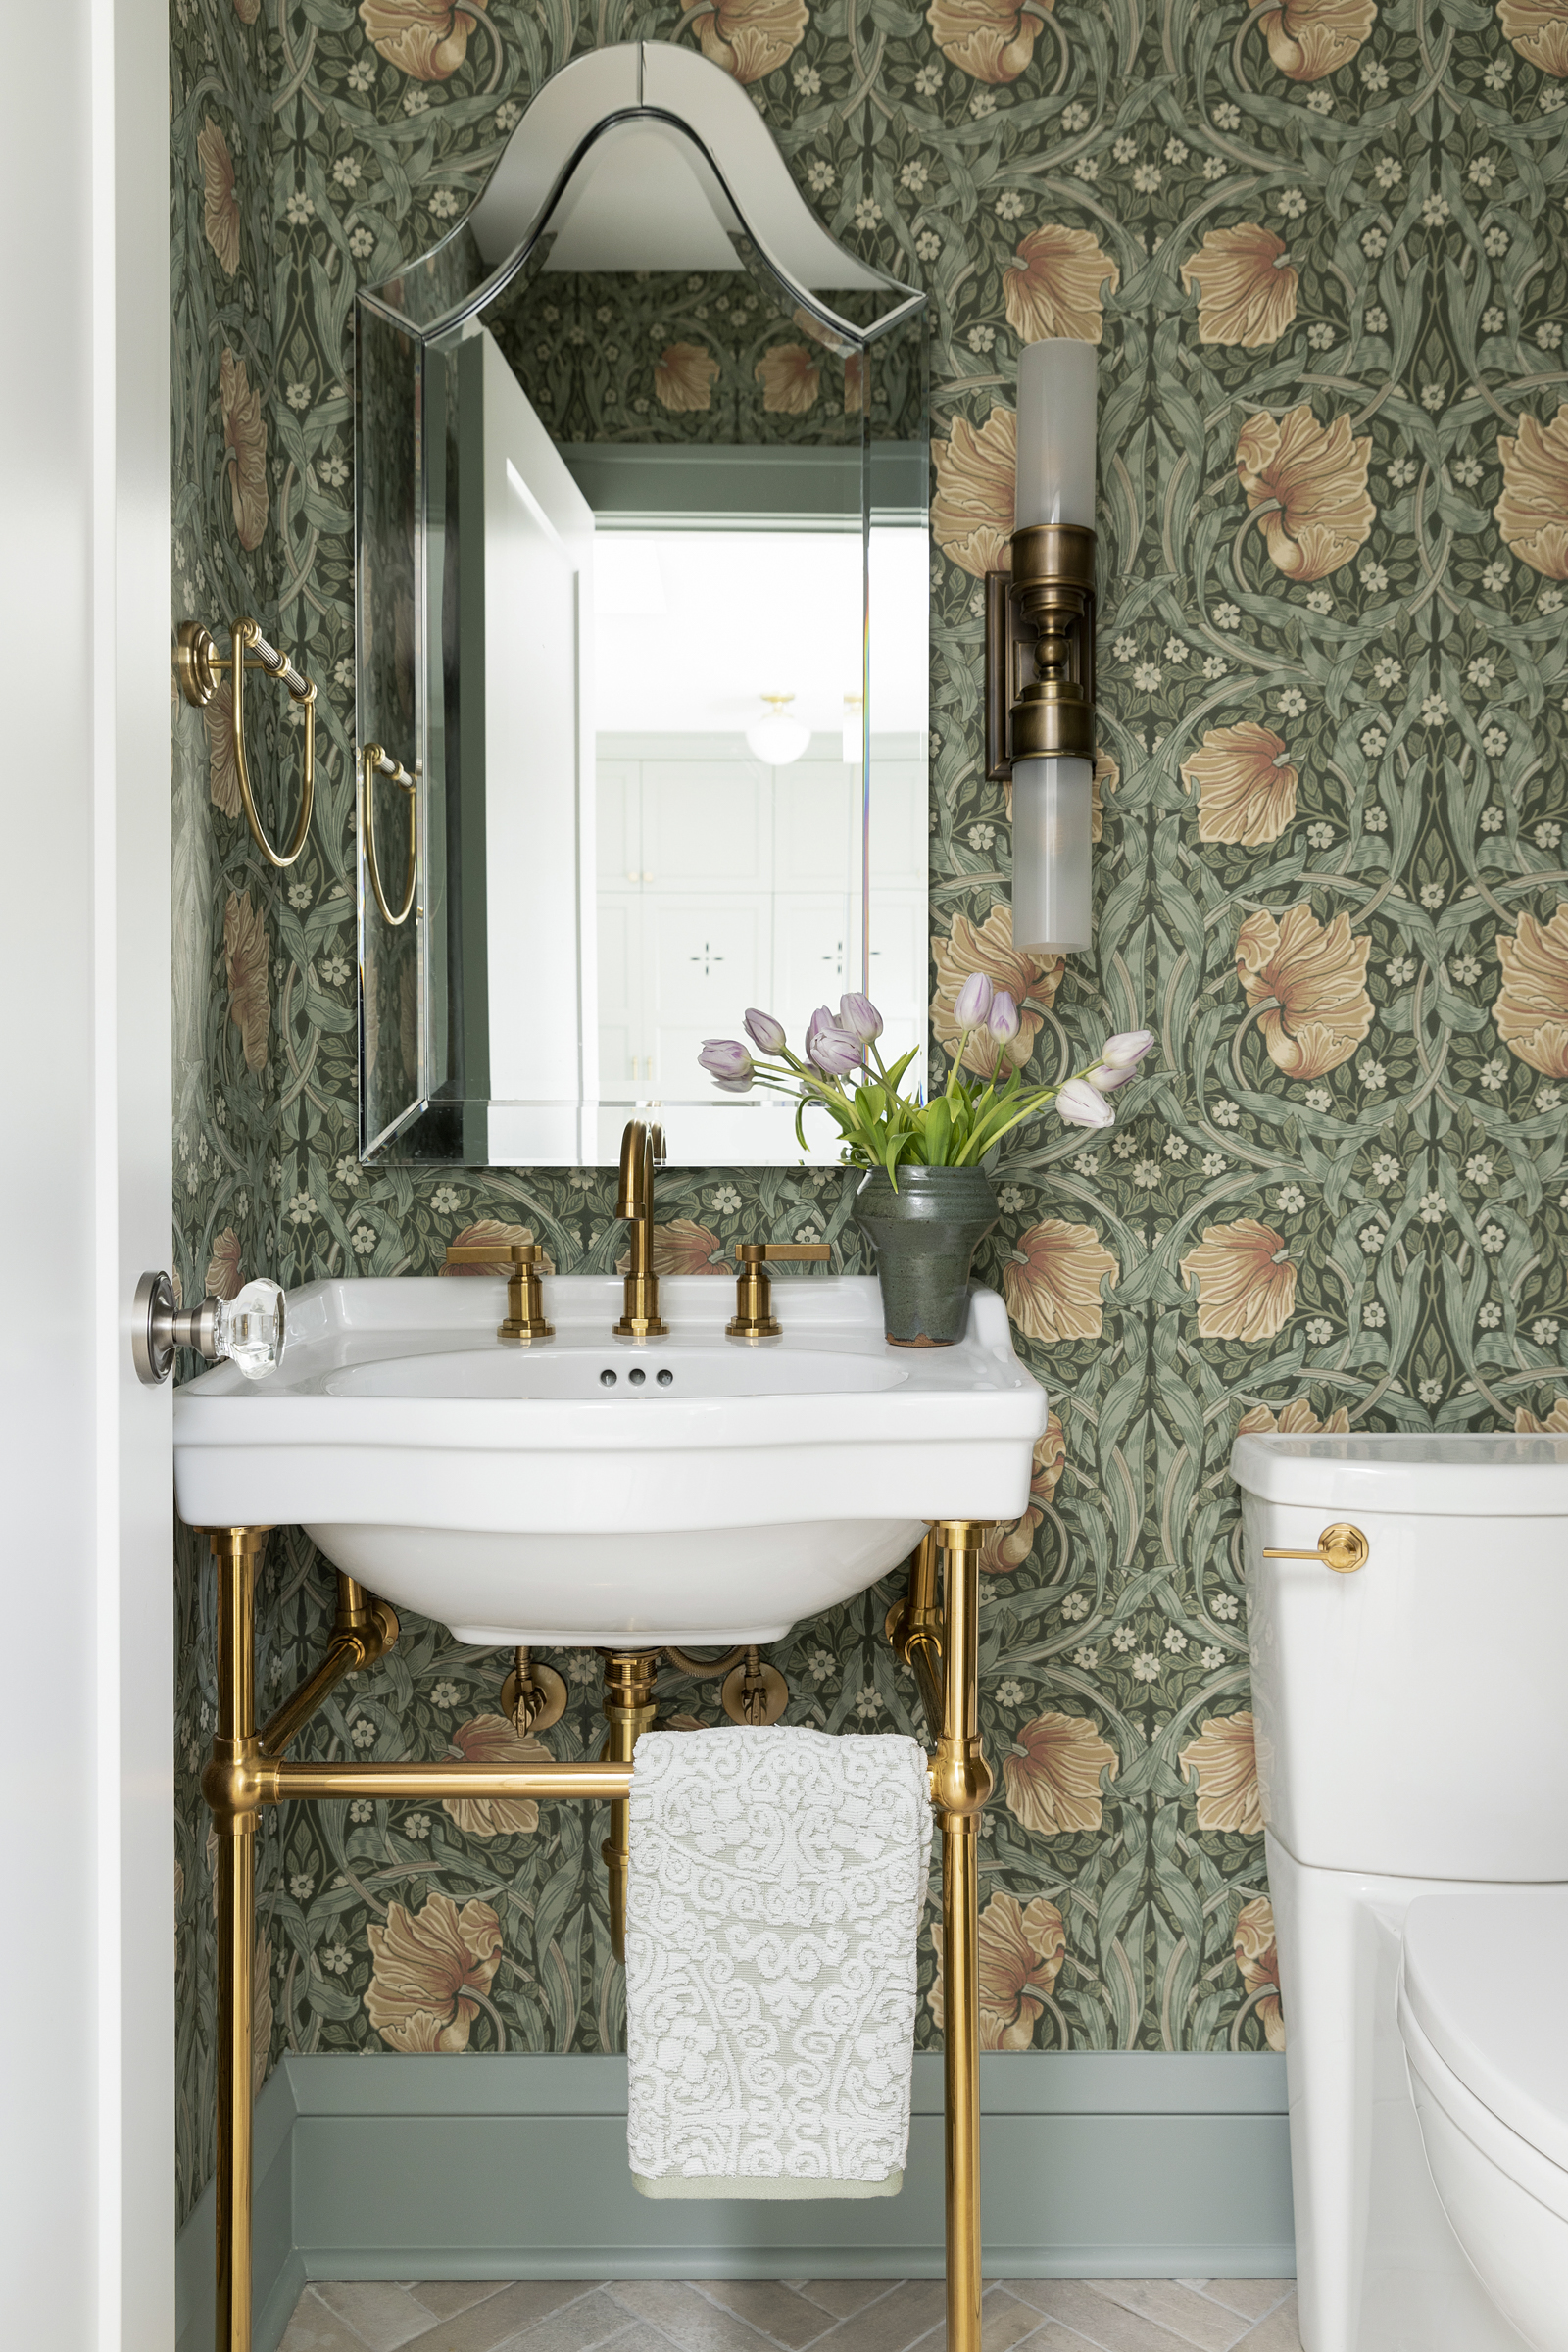 Twin Cities powder room renovation with green floral wallpaper, console sink, and brass accents.